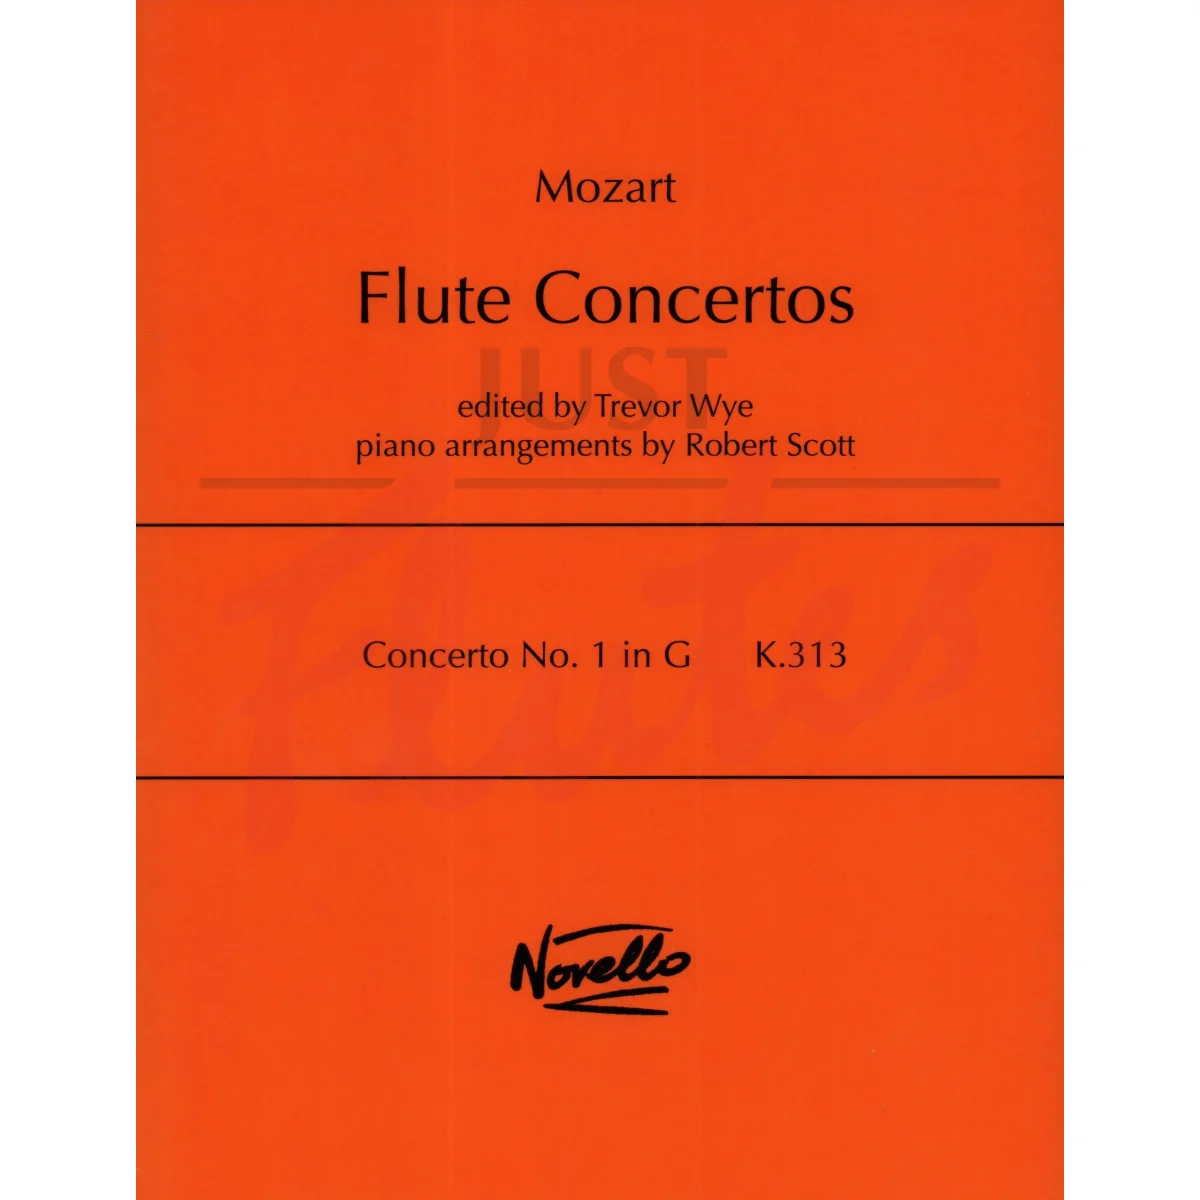 Concerto No 1 in G major for Flute and Piano